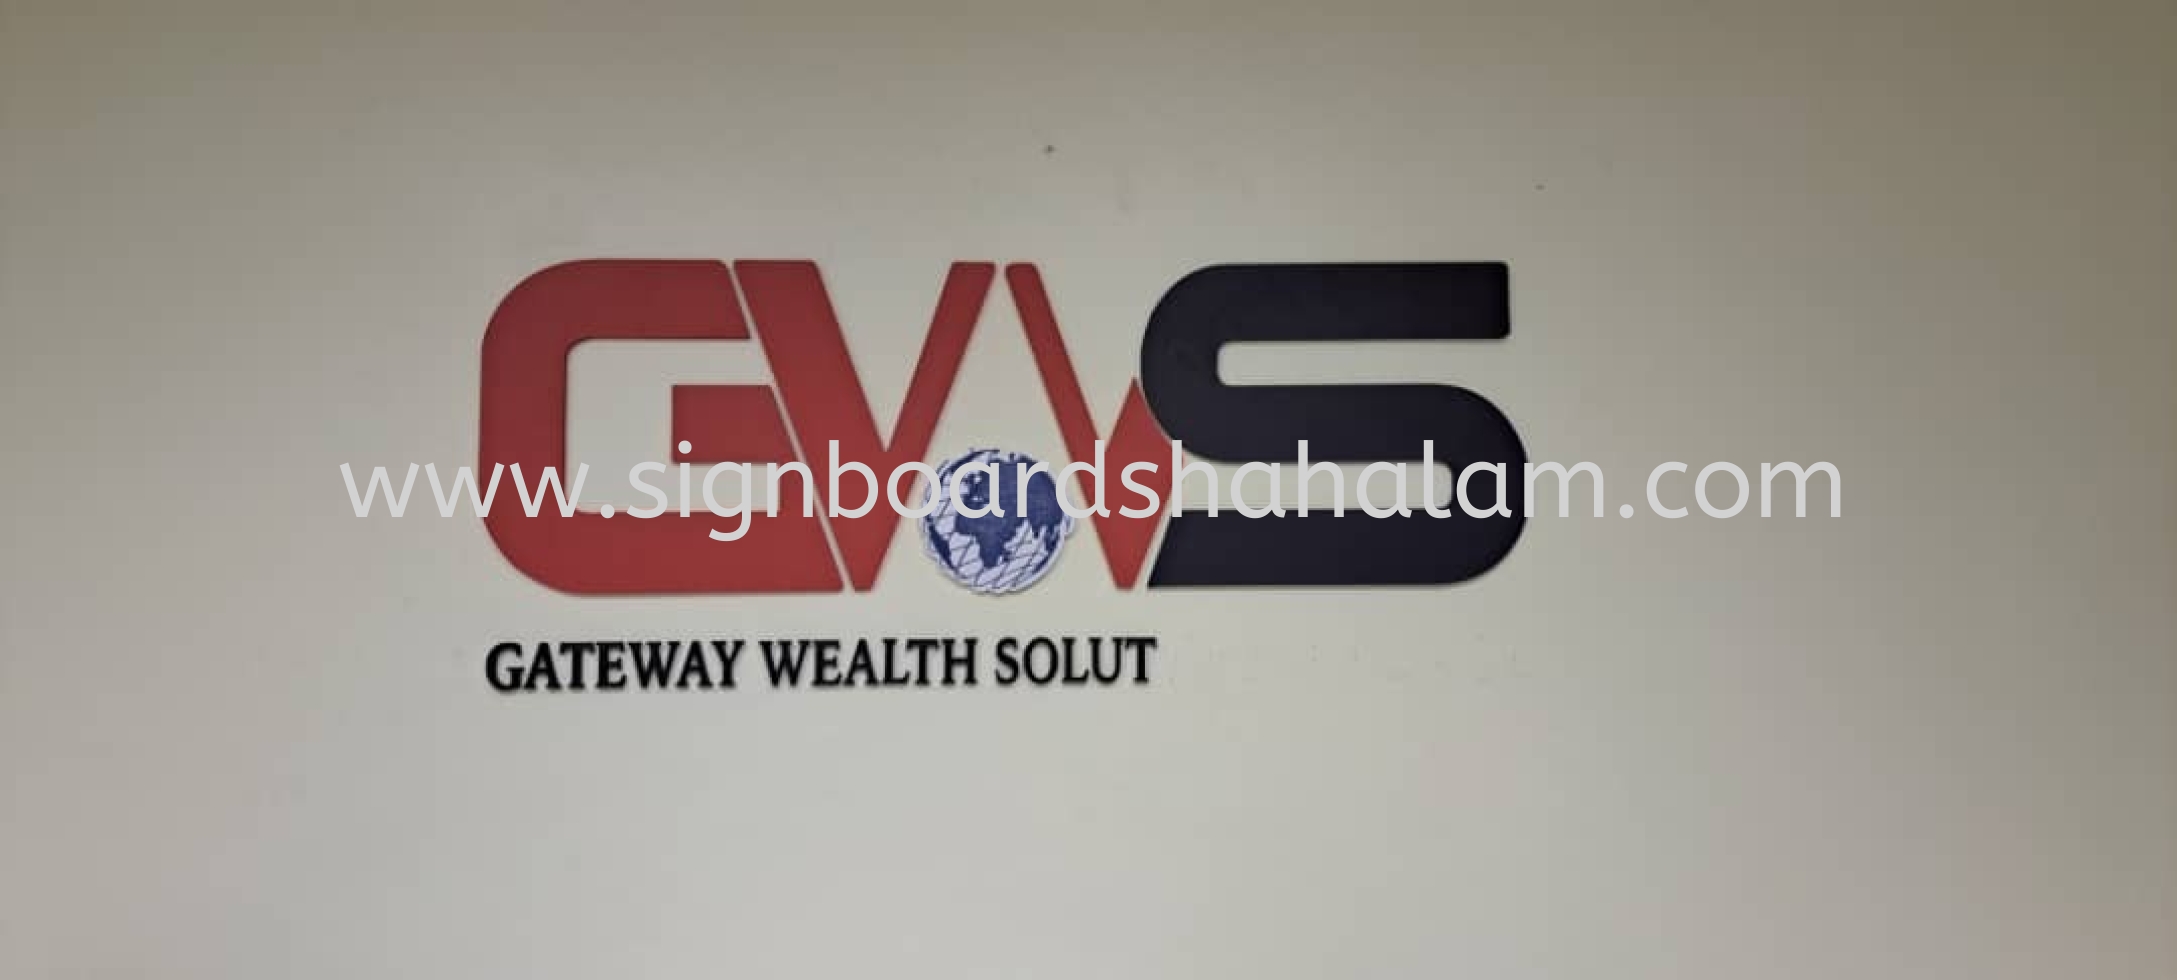 Global Wealth Solutions - 3D Cut Out Signage